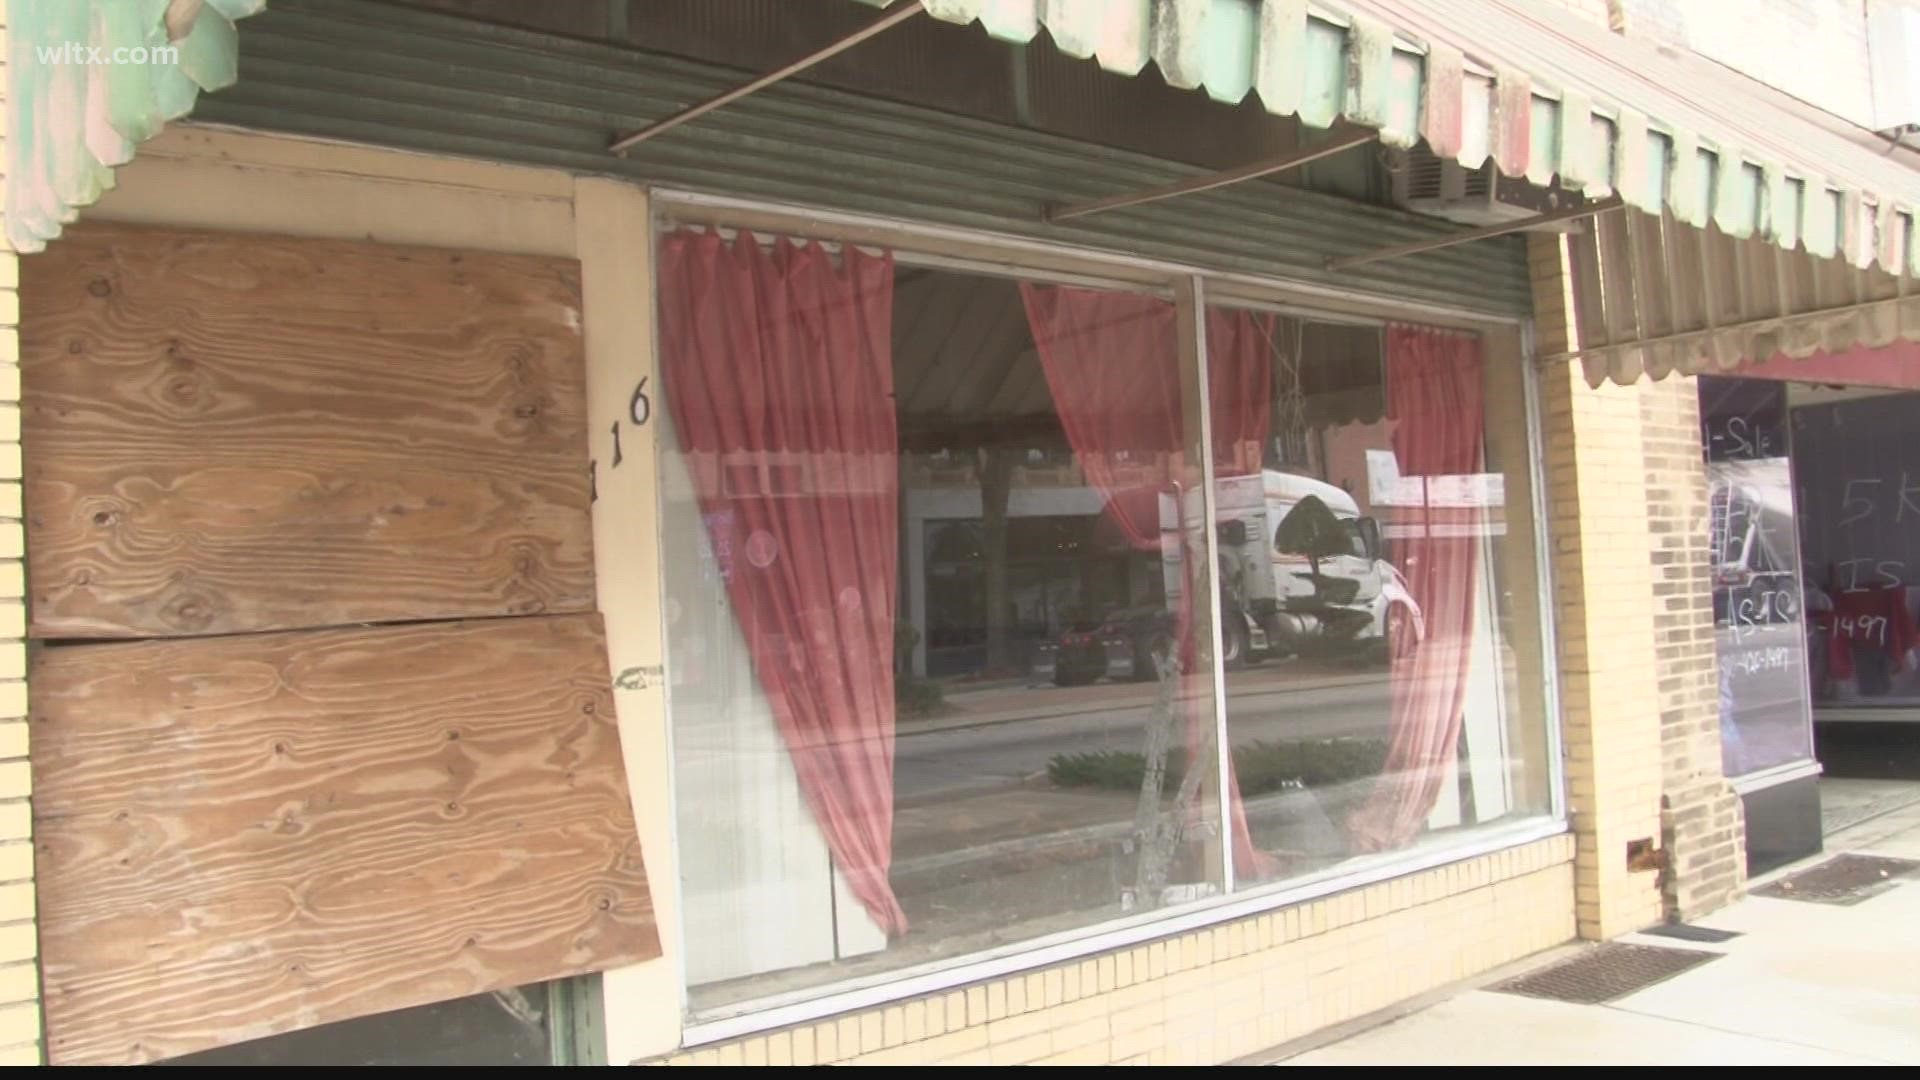 The city has plans on revitalizing old buildings and streetscaping with grant funding.